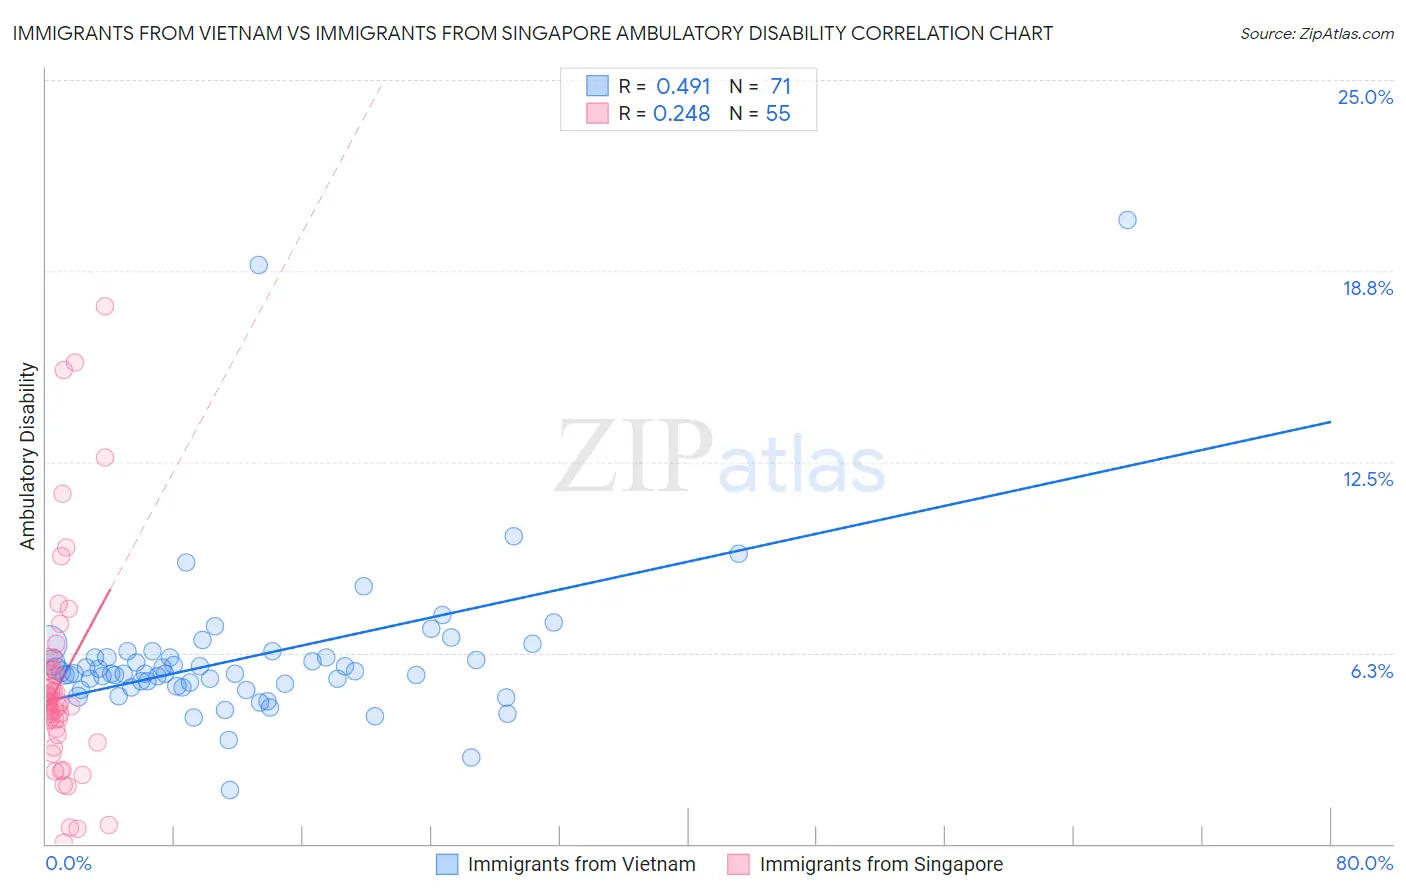 Immigrants from Vietnam vs Immigrants from Singapore Ambulatory Disability